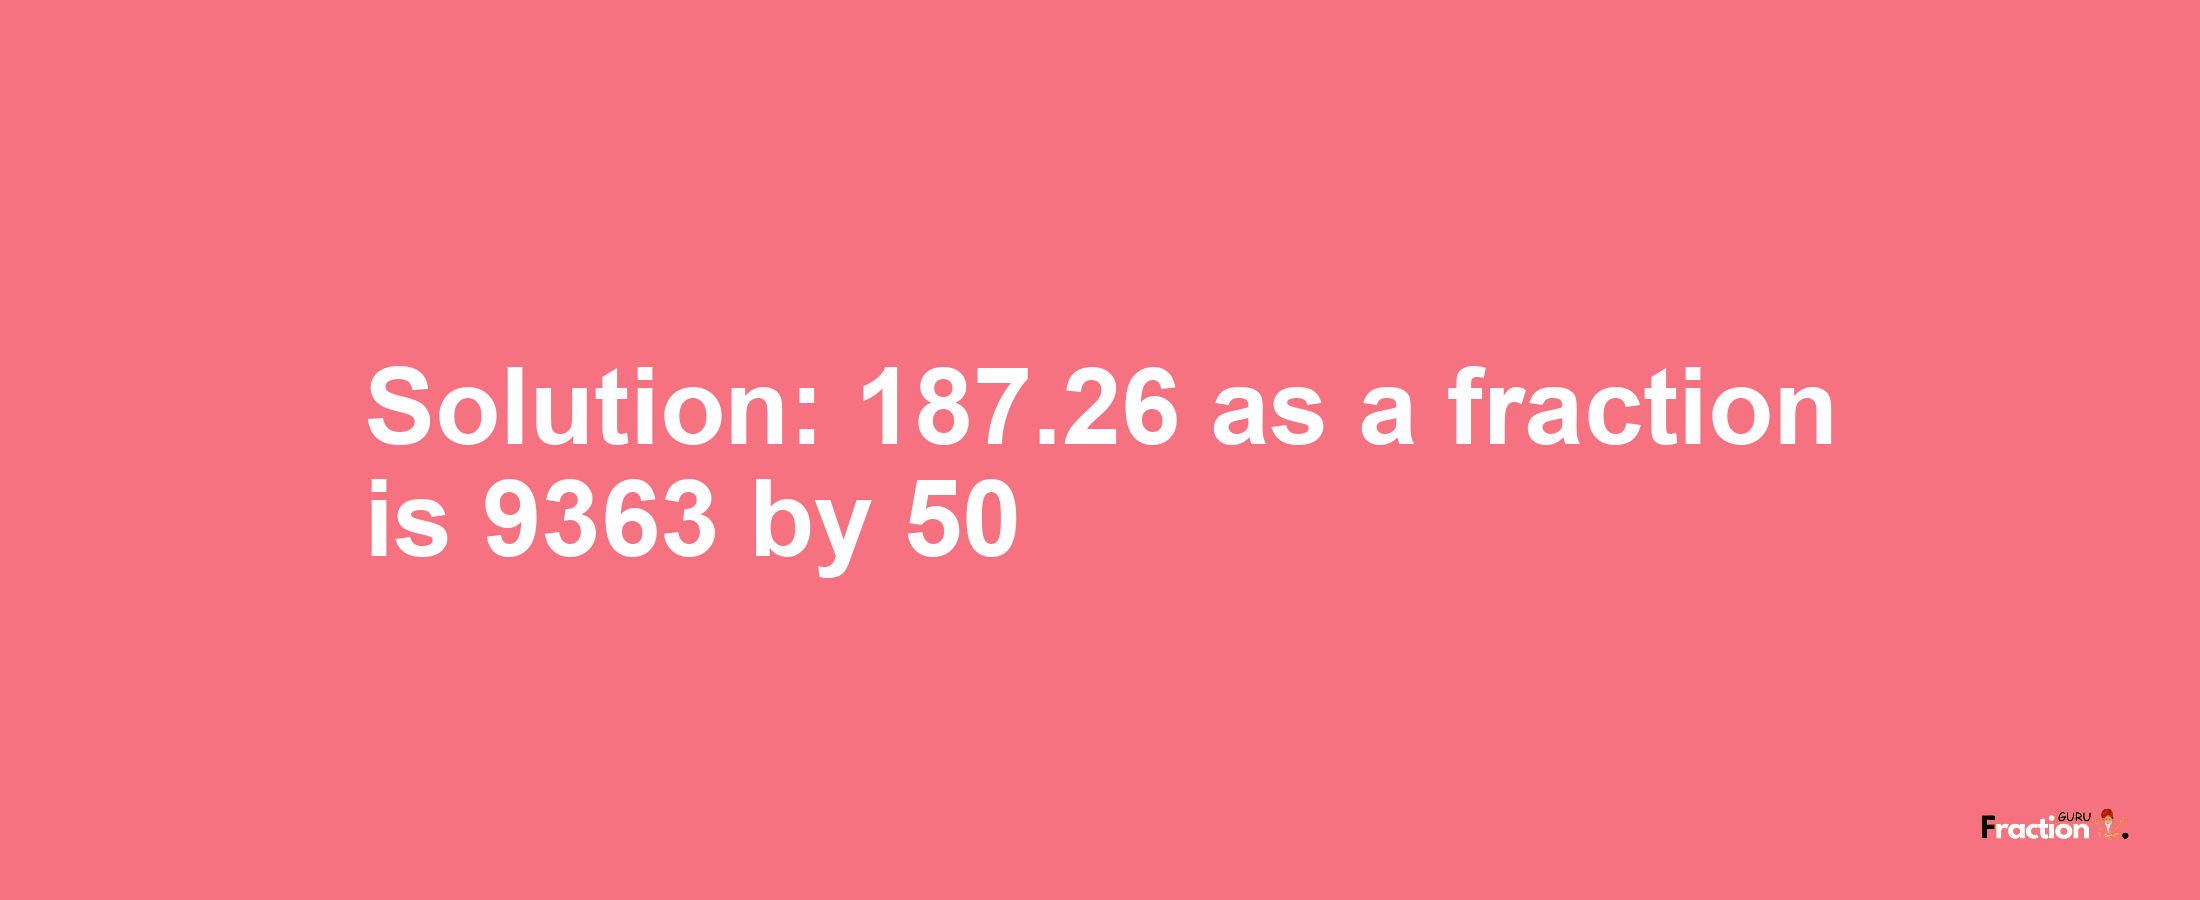 Solution:187.26 as a fraction is 9363/50